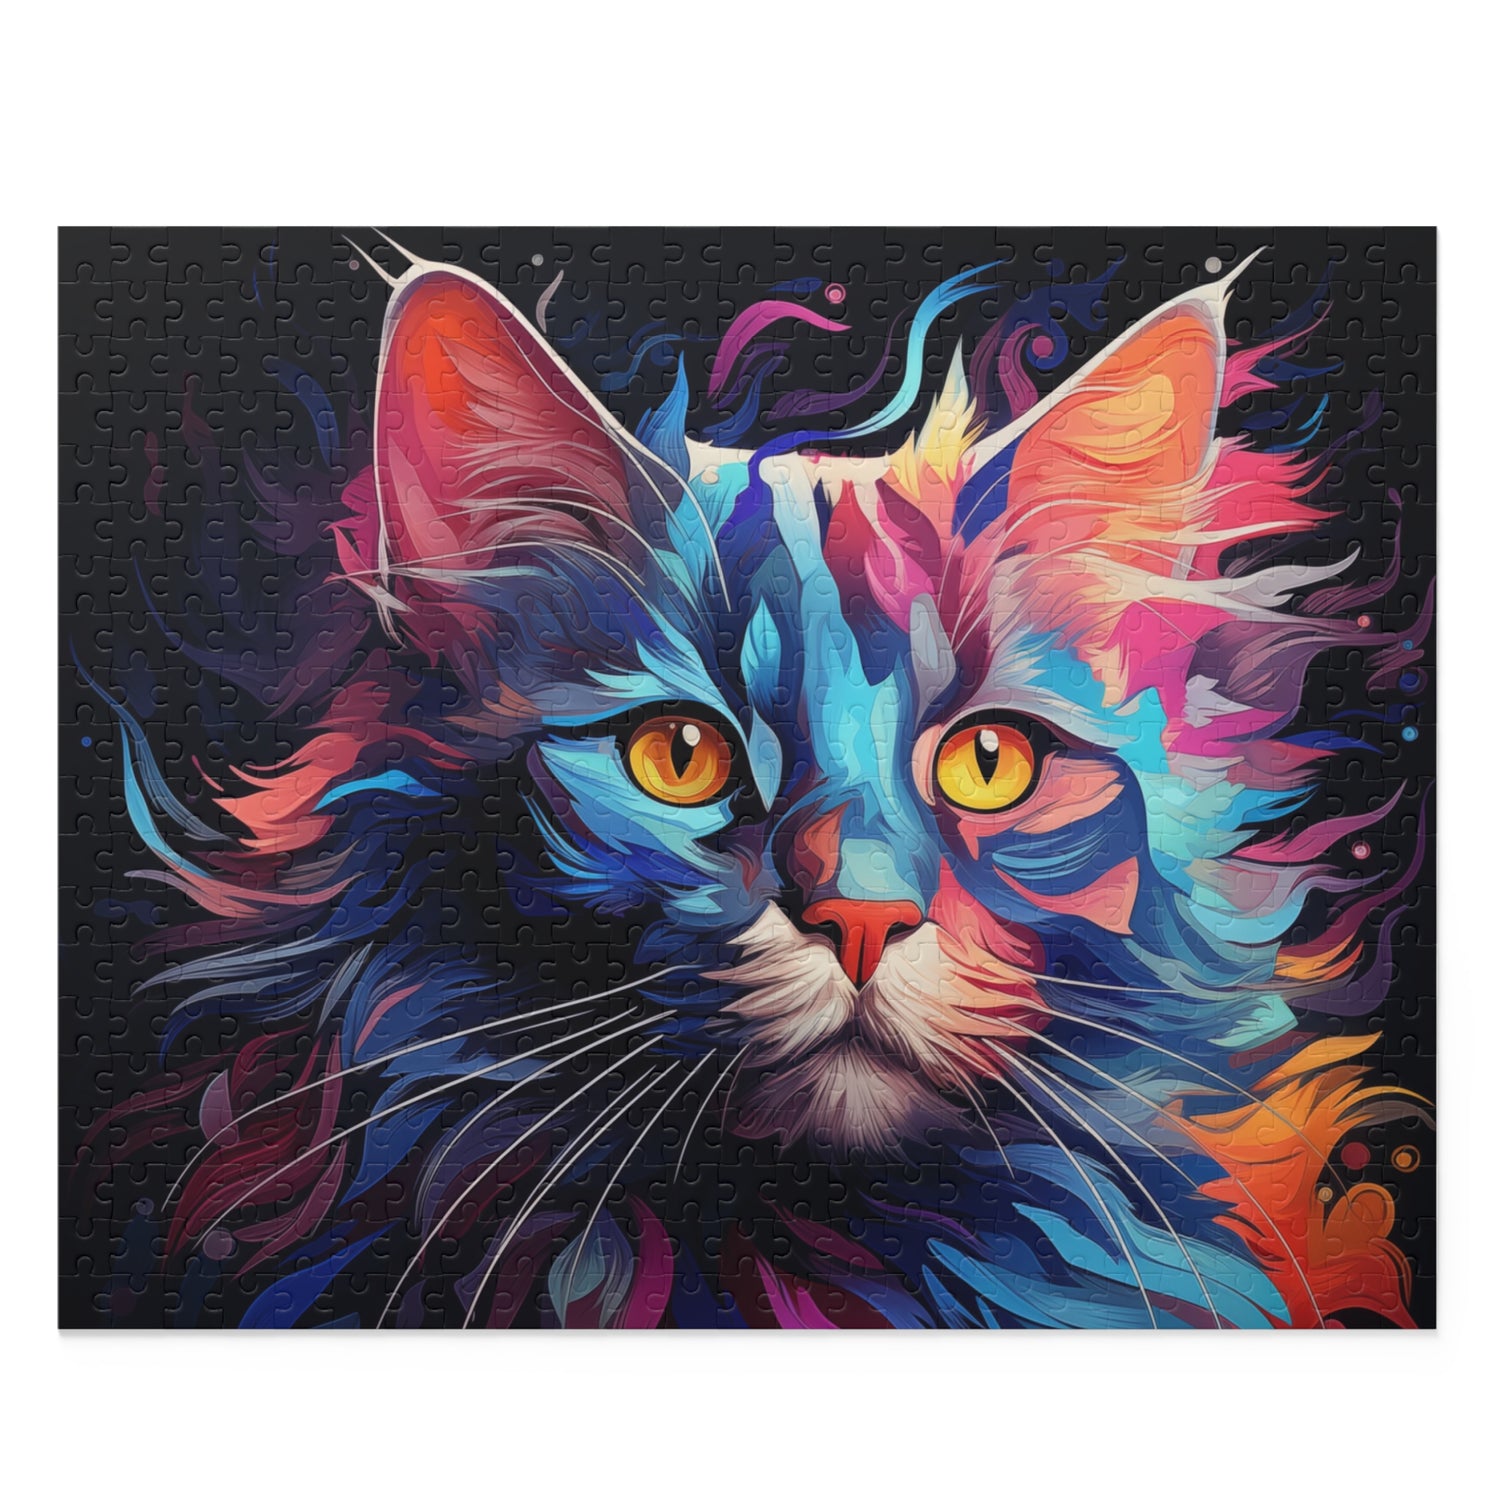 Copy of Abstract Cat Oil Paint Jigsaw Puzzle Adult Birthday Business Jigsaw Puzzle Gift for Him Funny Humorous Indoor Outdoor Game Gift For Her Online-1